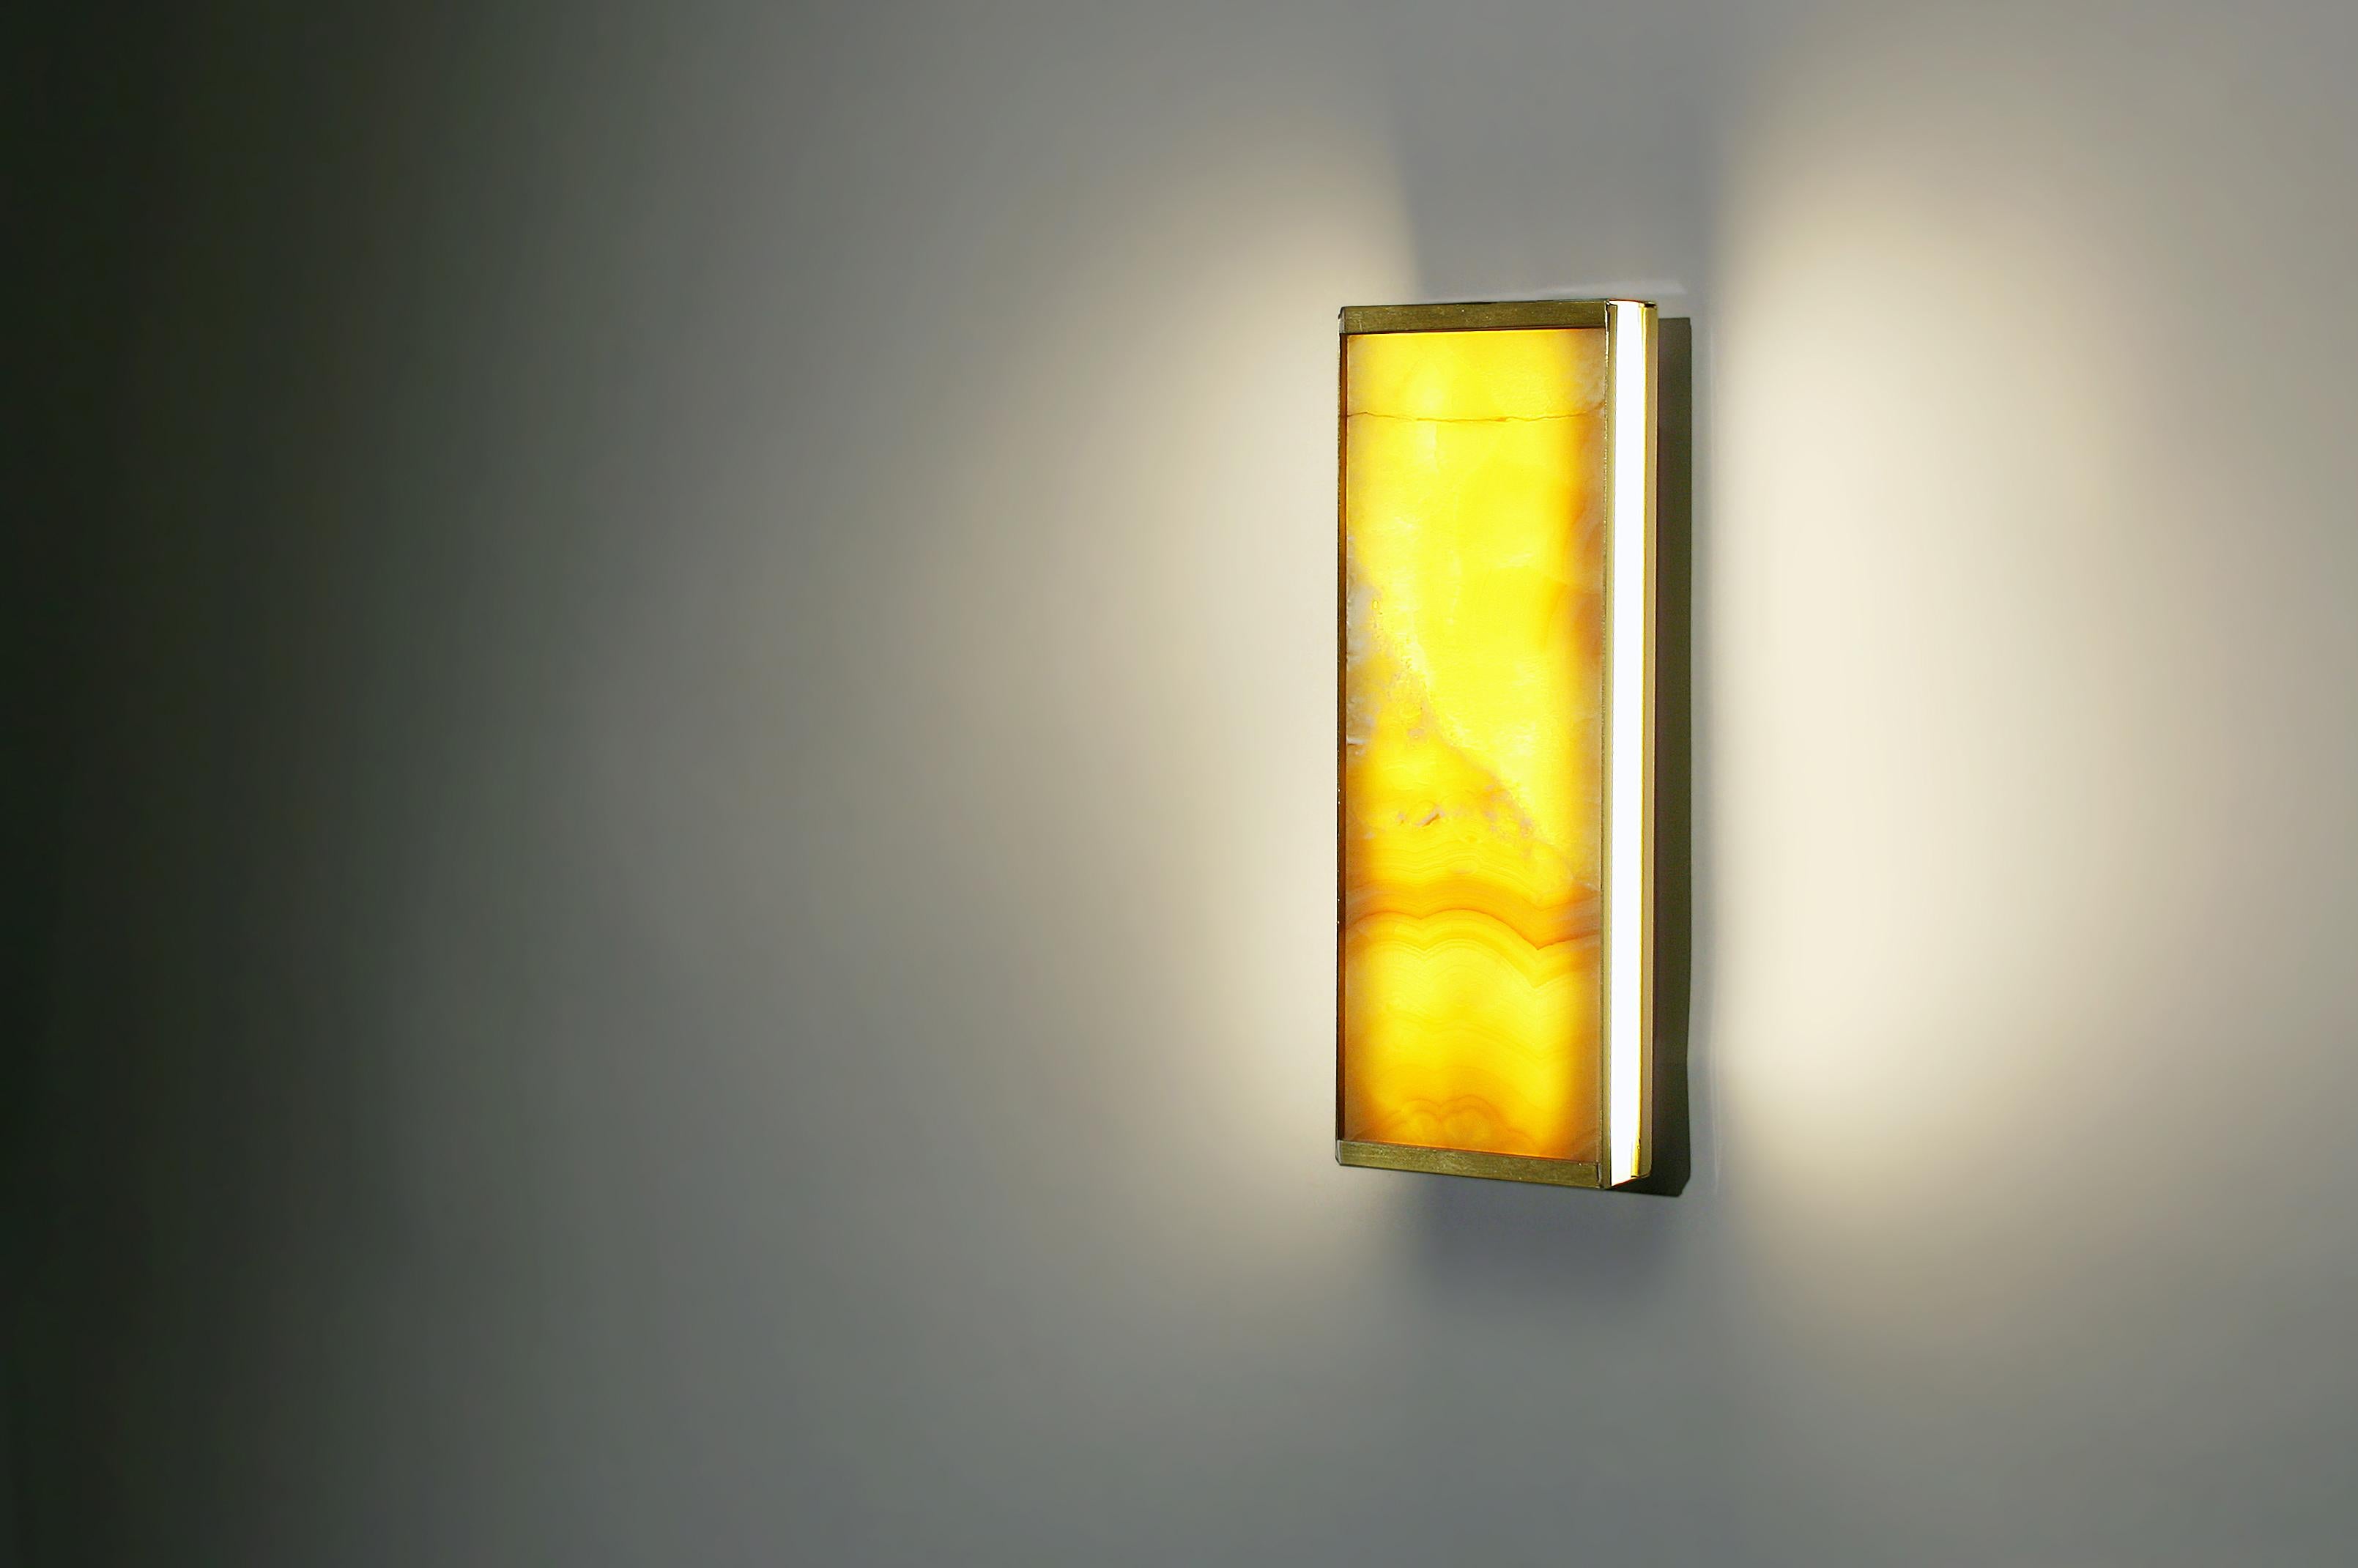 The Tech short wall sconce is a lighting fixture that was designed to merge the luminaire and lampshade into a singular unit, using the translucent properties of ultra-thin veined yellow onyx to create an interplay of light and shadow that